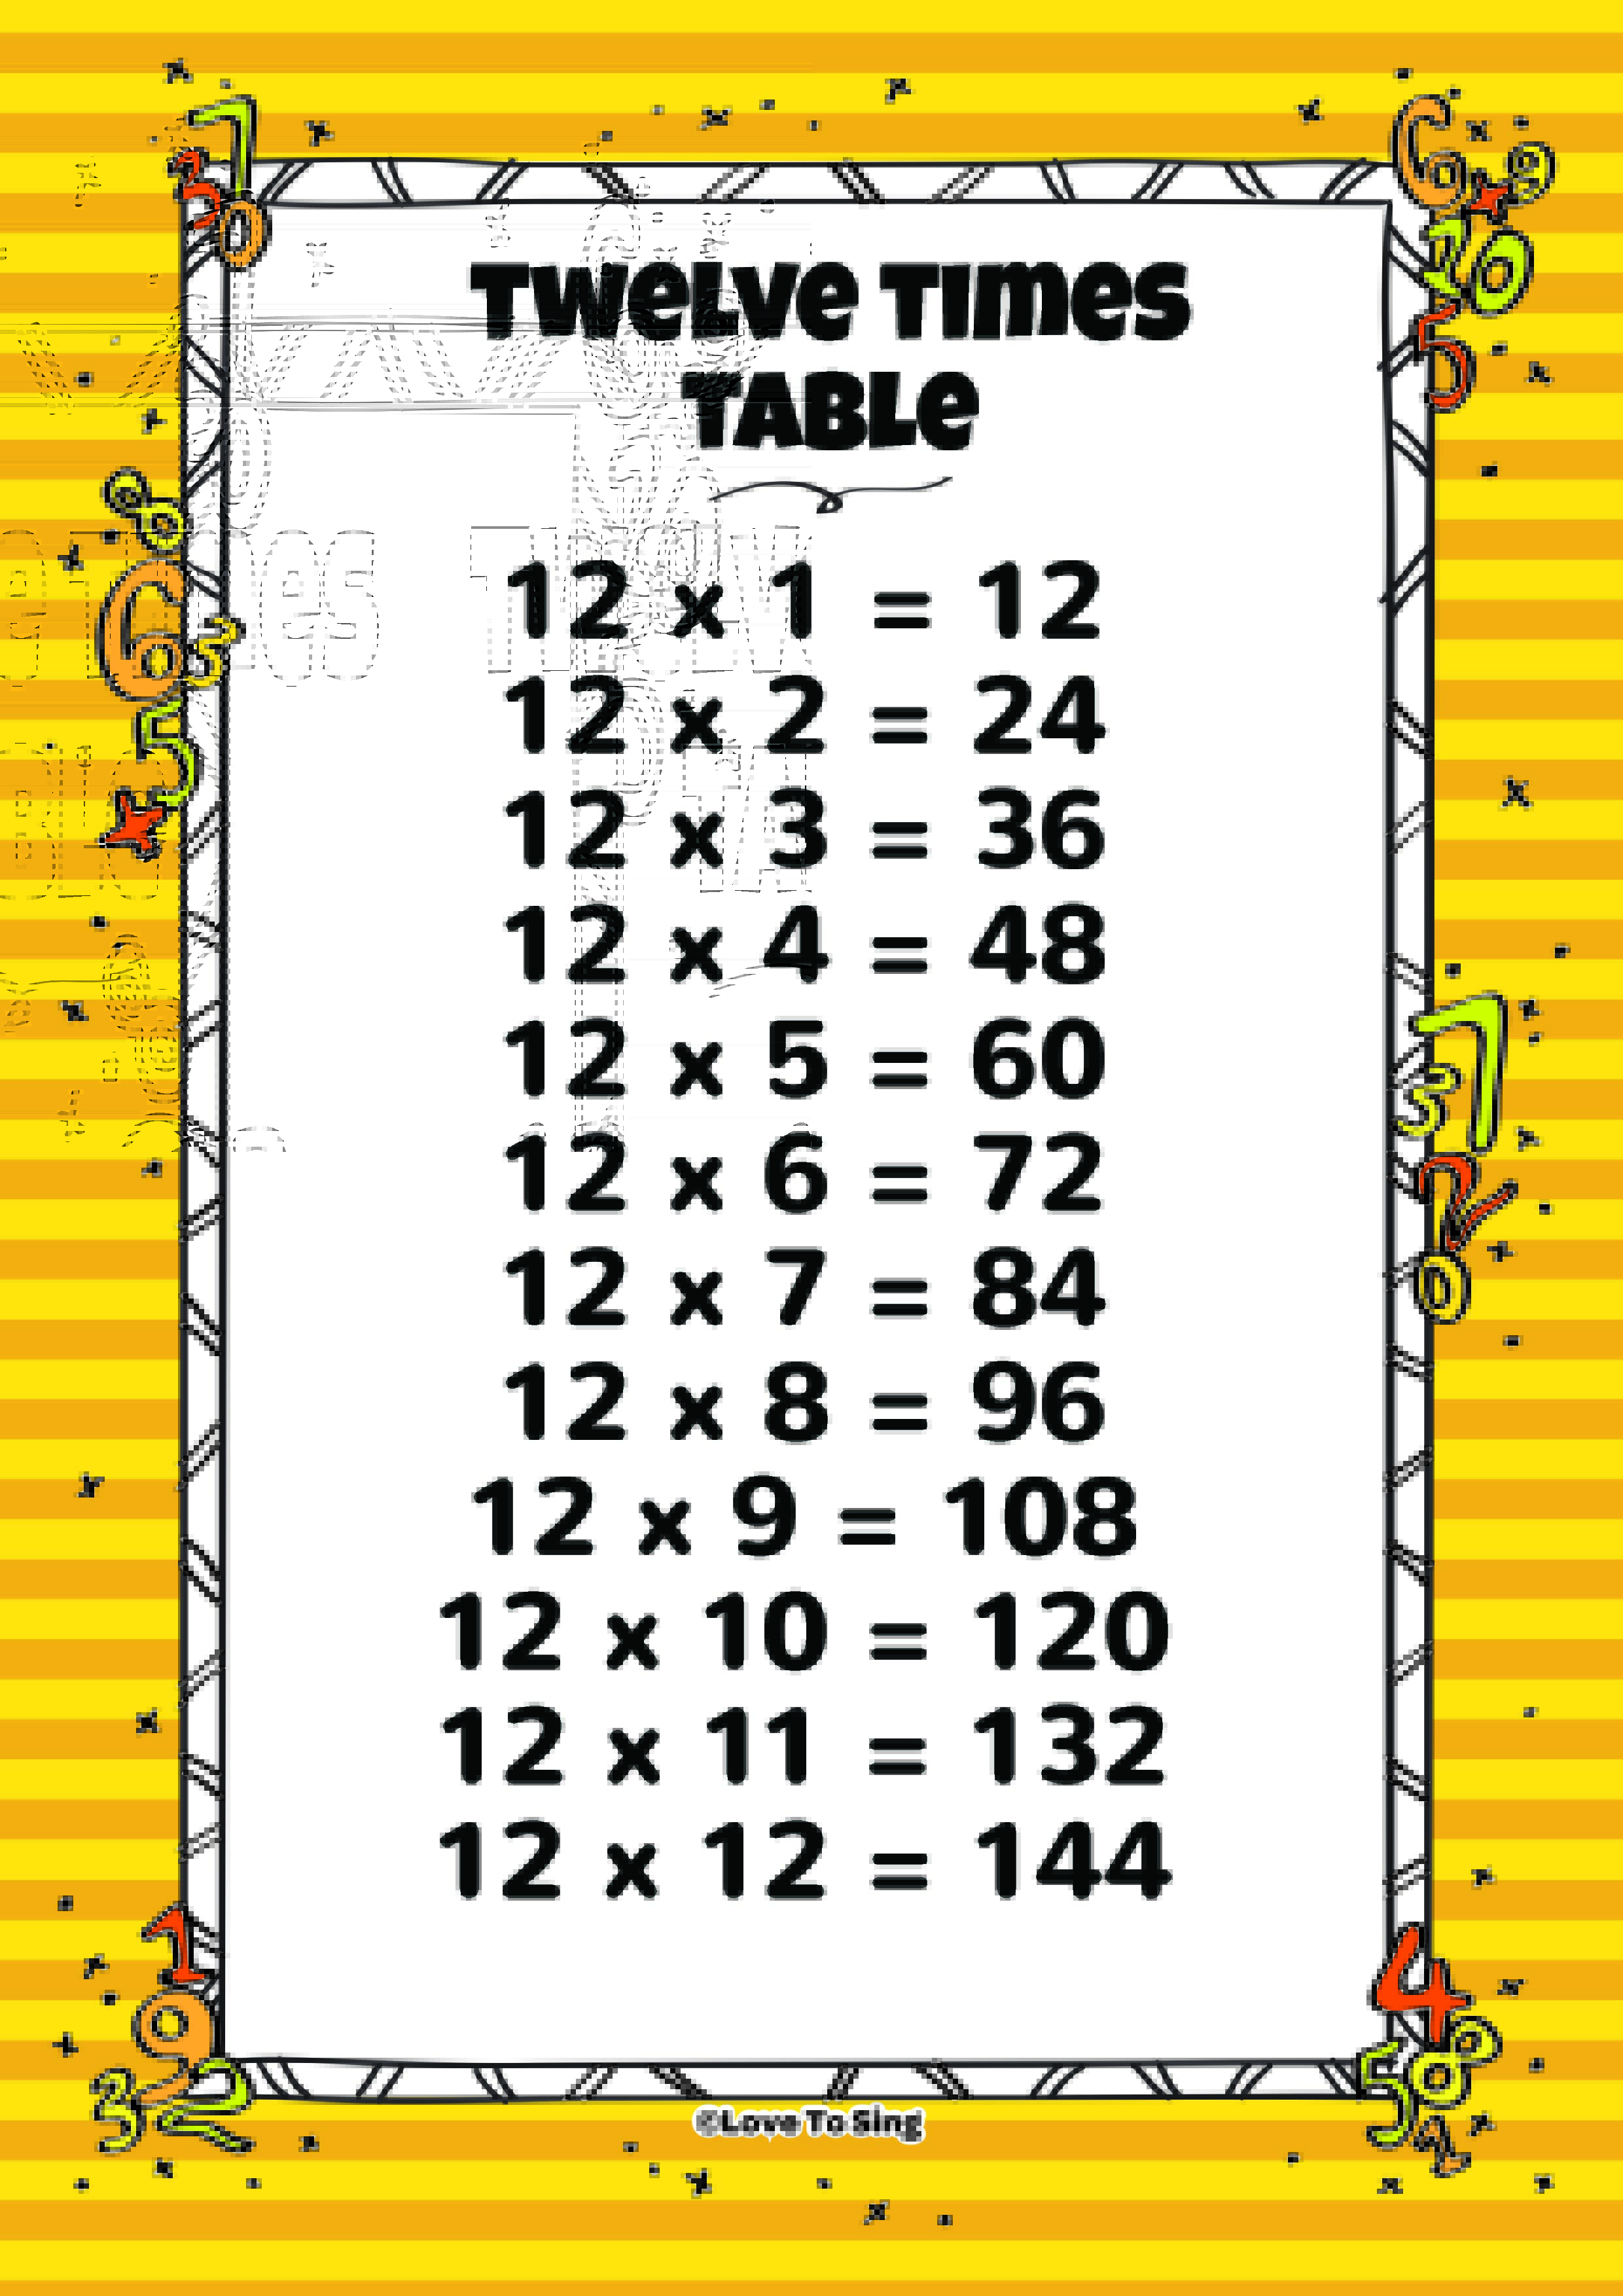 twelve-times-table-and-random-test-kids-video-song-with-free-lyrics-activities